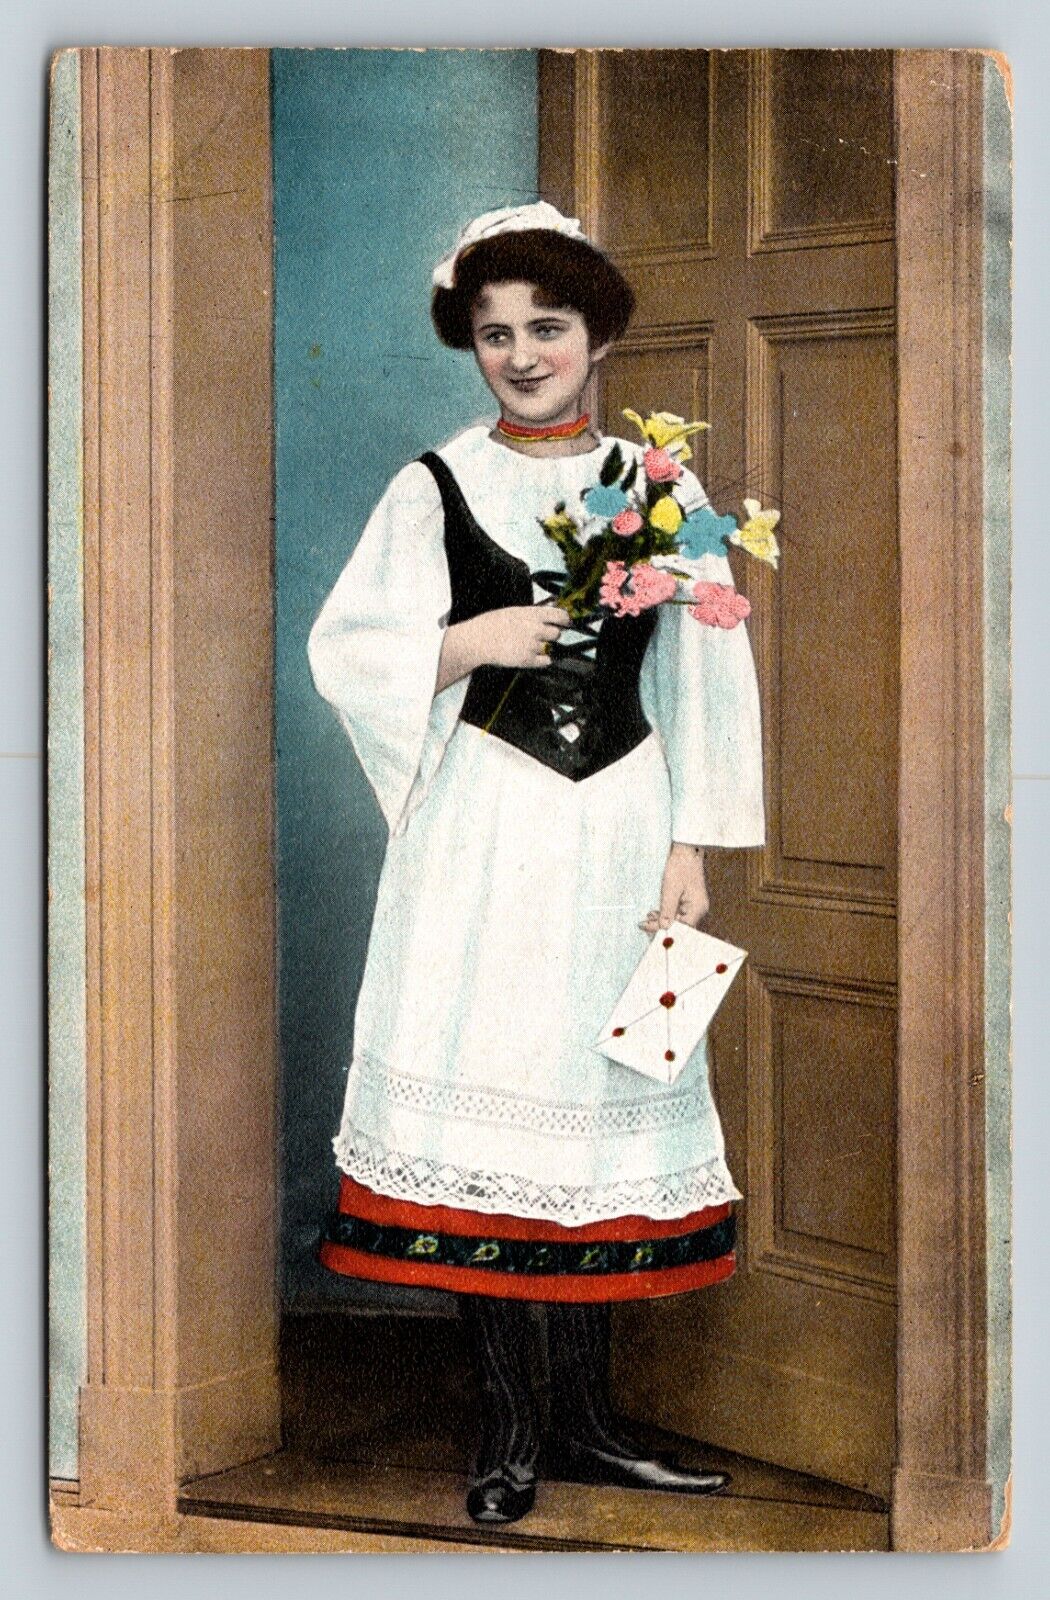 Woman w/ Flowers & Card Stands At Door Classic Fashion ANTIQUE Postcard